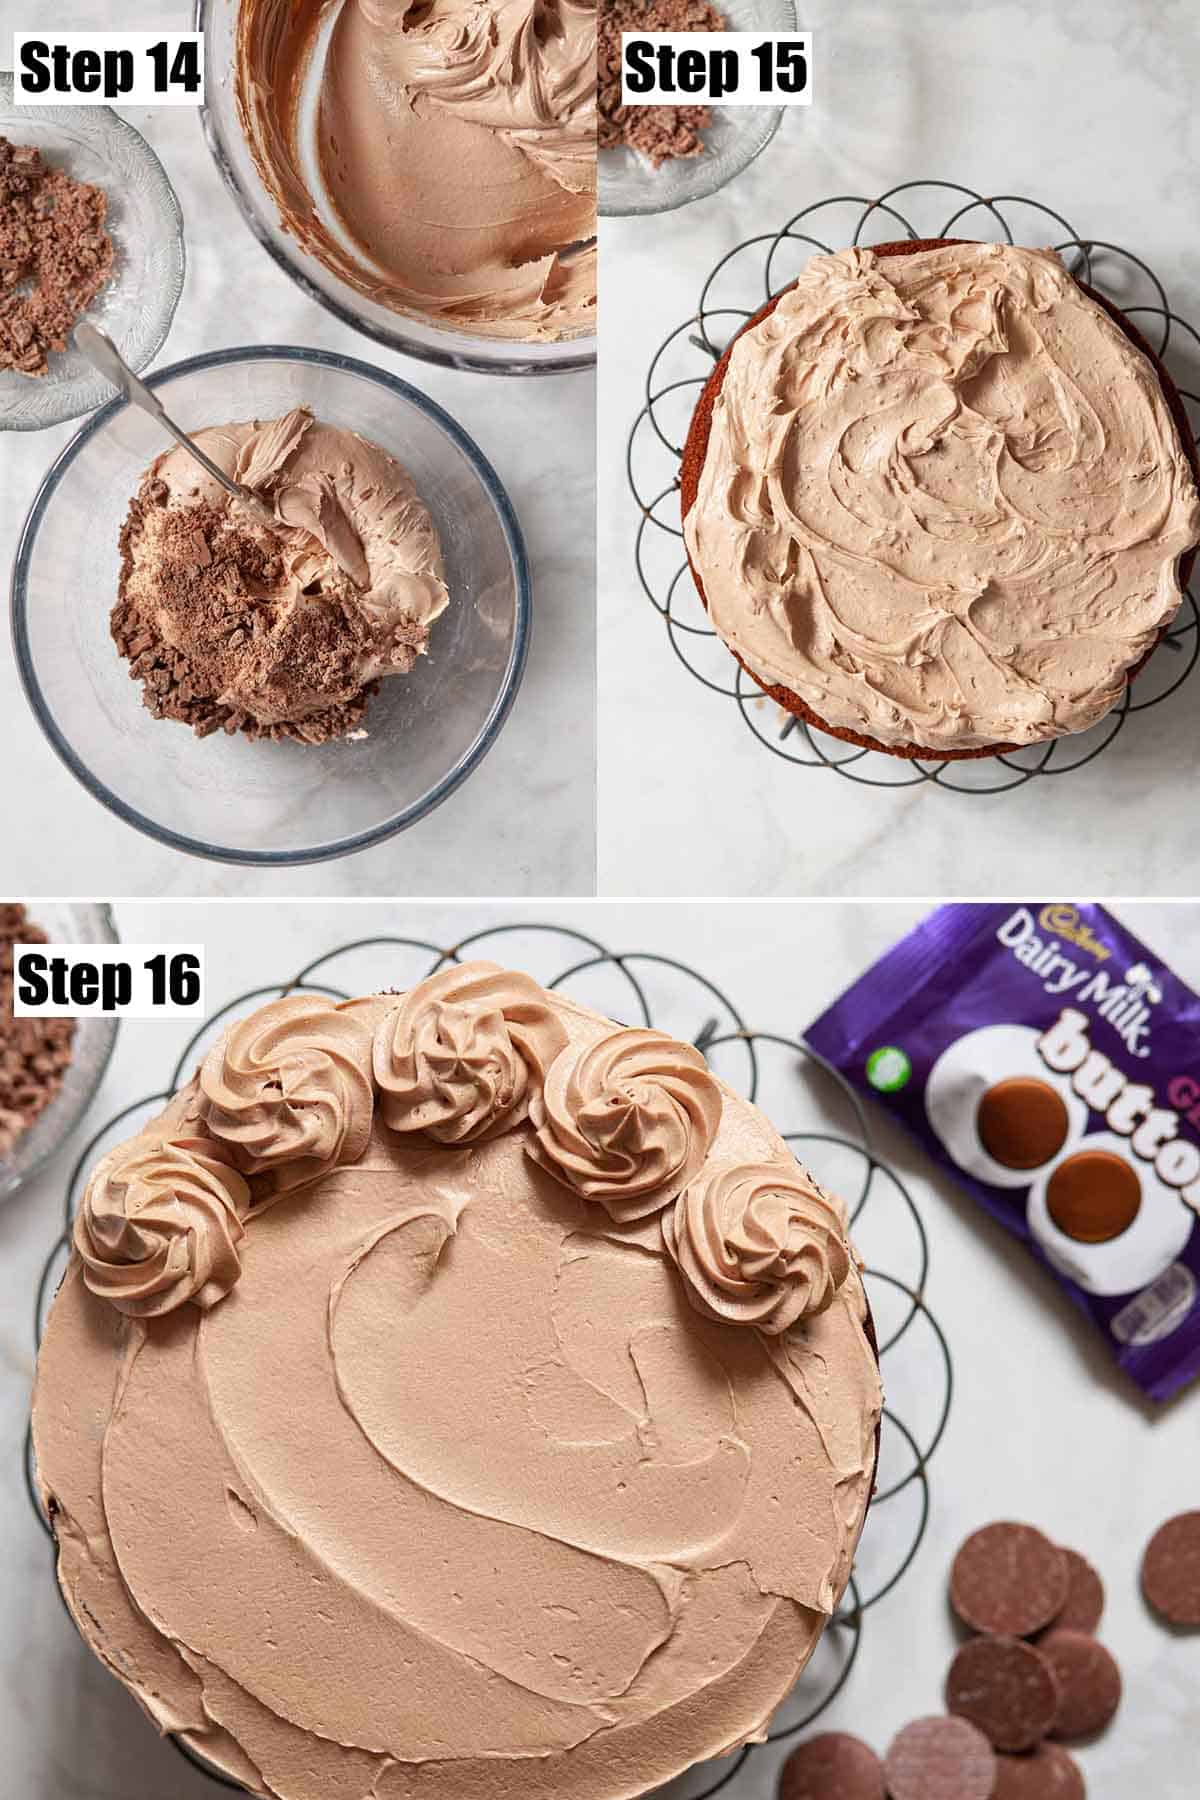 Collage of images showing milk chocolate buttercream being made and used.